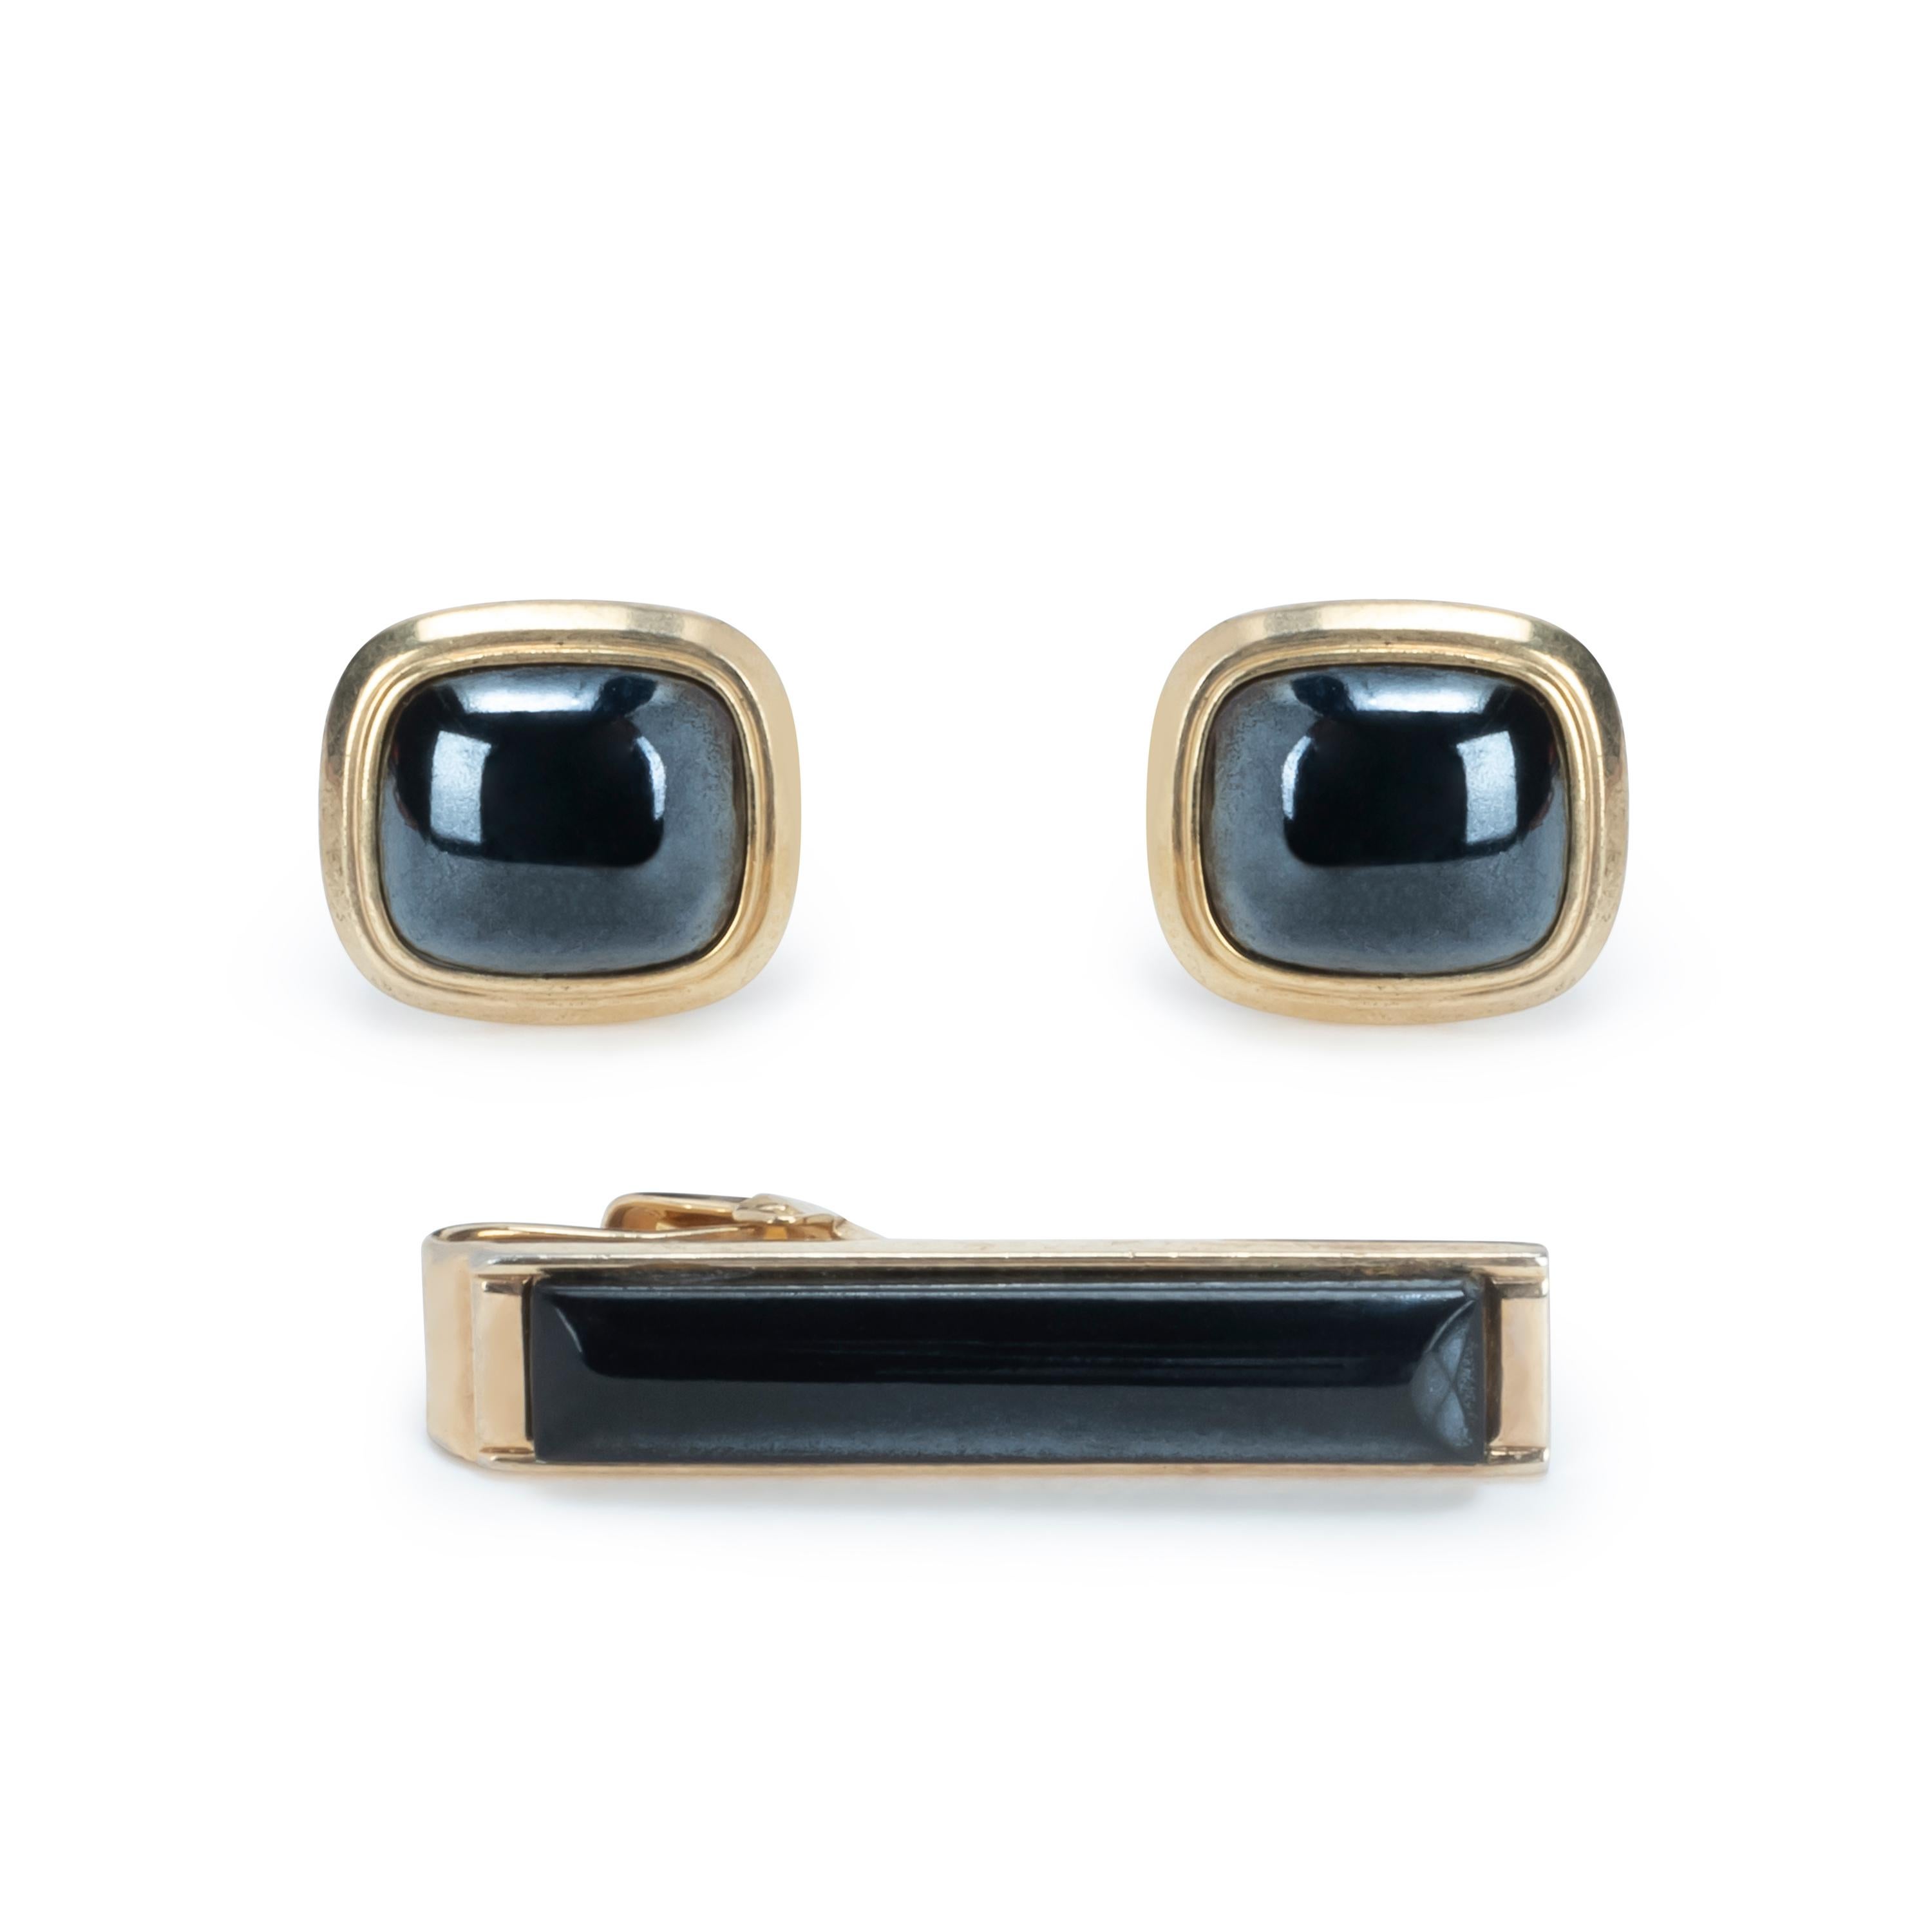 Vintage Marvel Goldtone Black Square Cufflinks & Rectangle Tie Clip
Vintage chic in mint condition. 
Onyx stones. 
Gold plated. 
Perfect for your evening black suit or black tie. 
Perfect for that special gift you are looking for. 